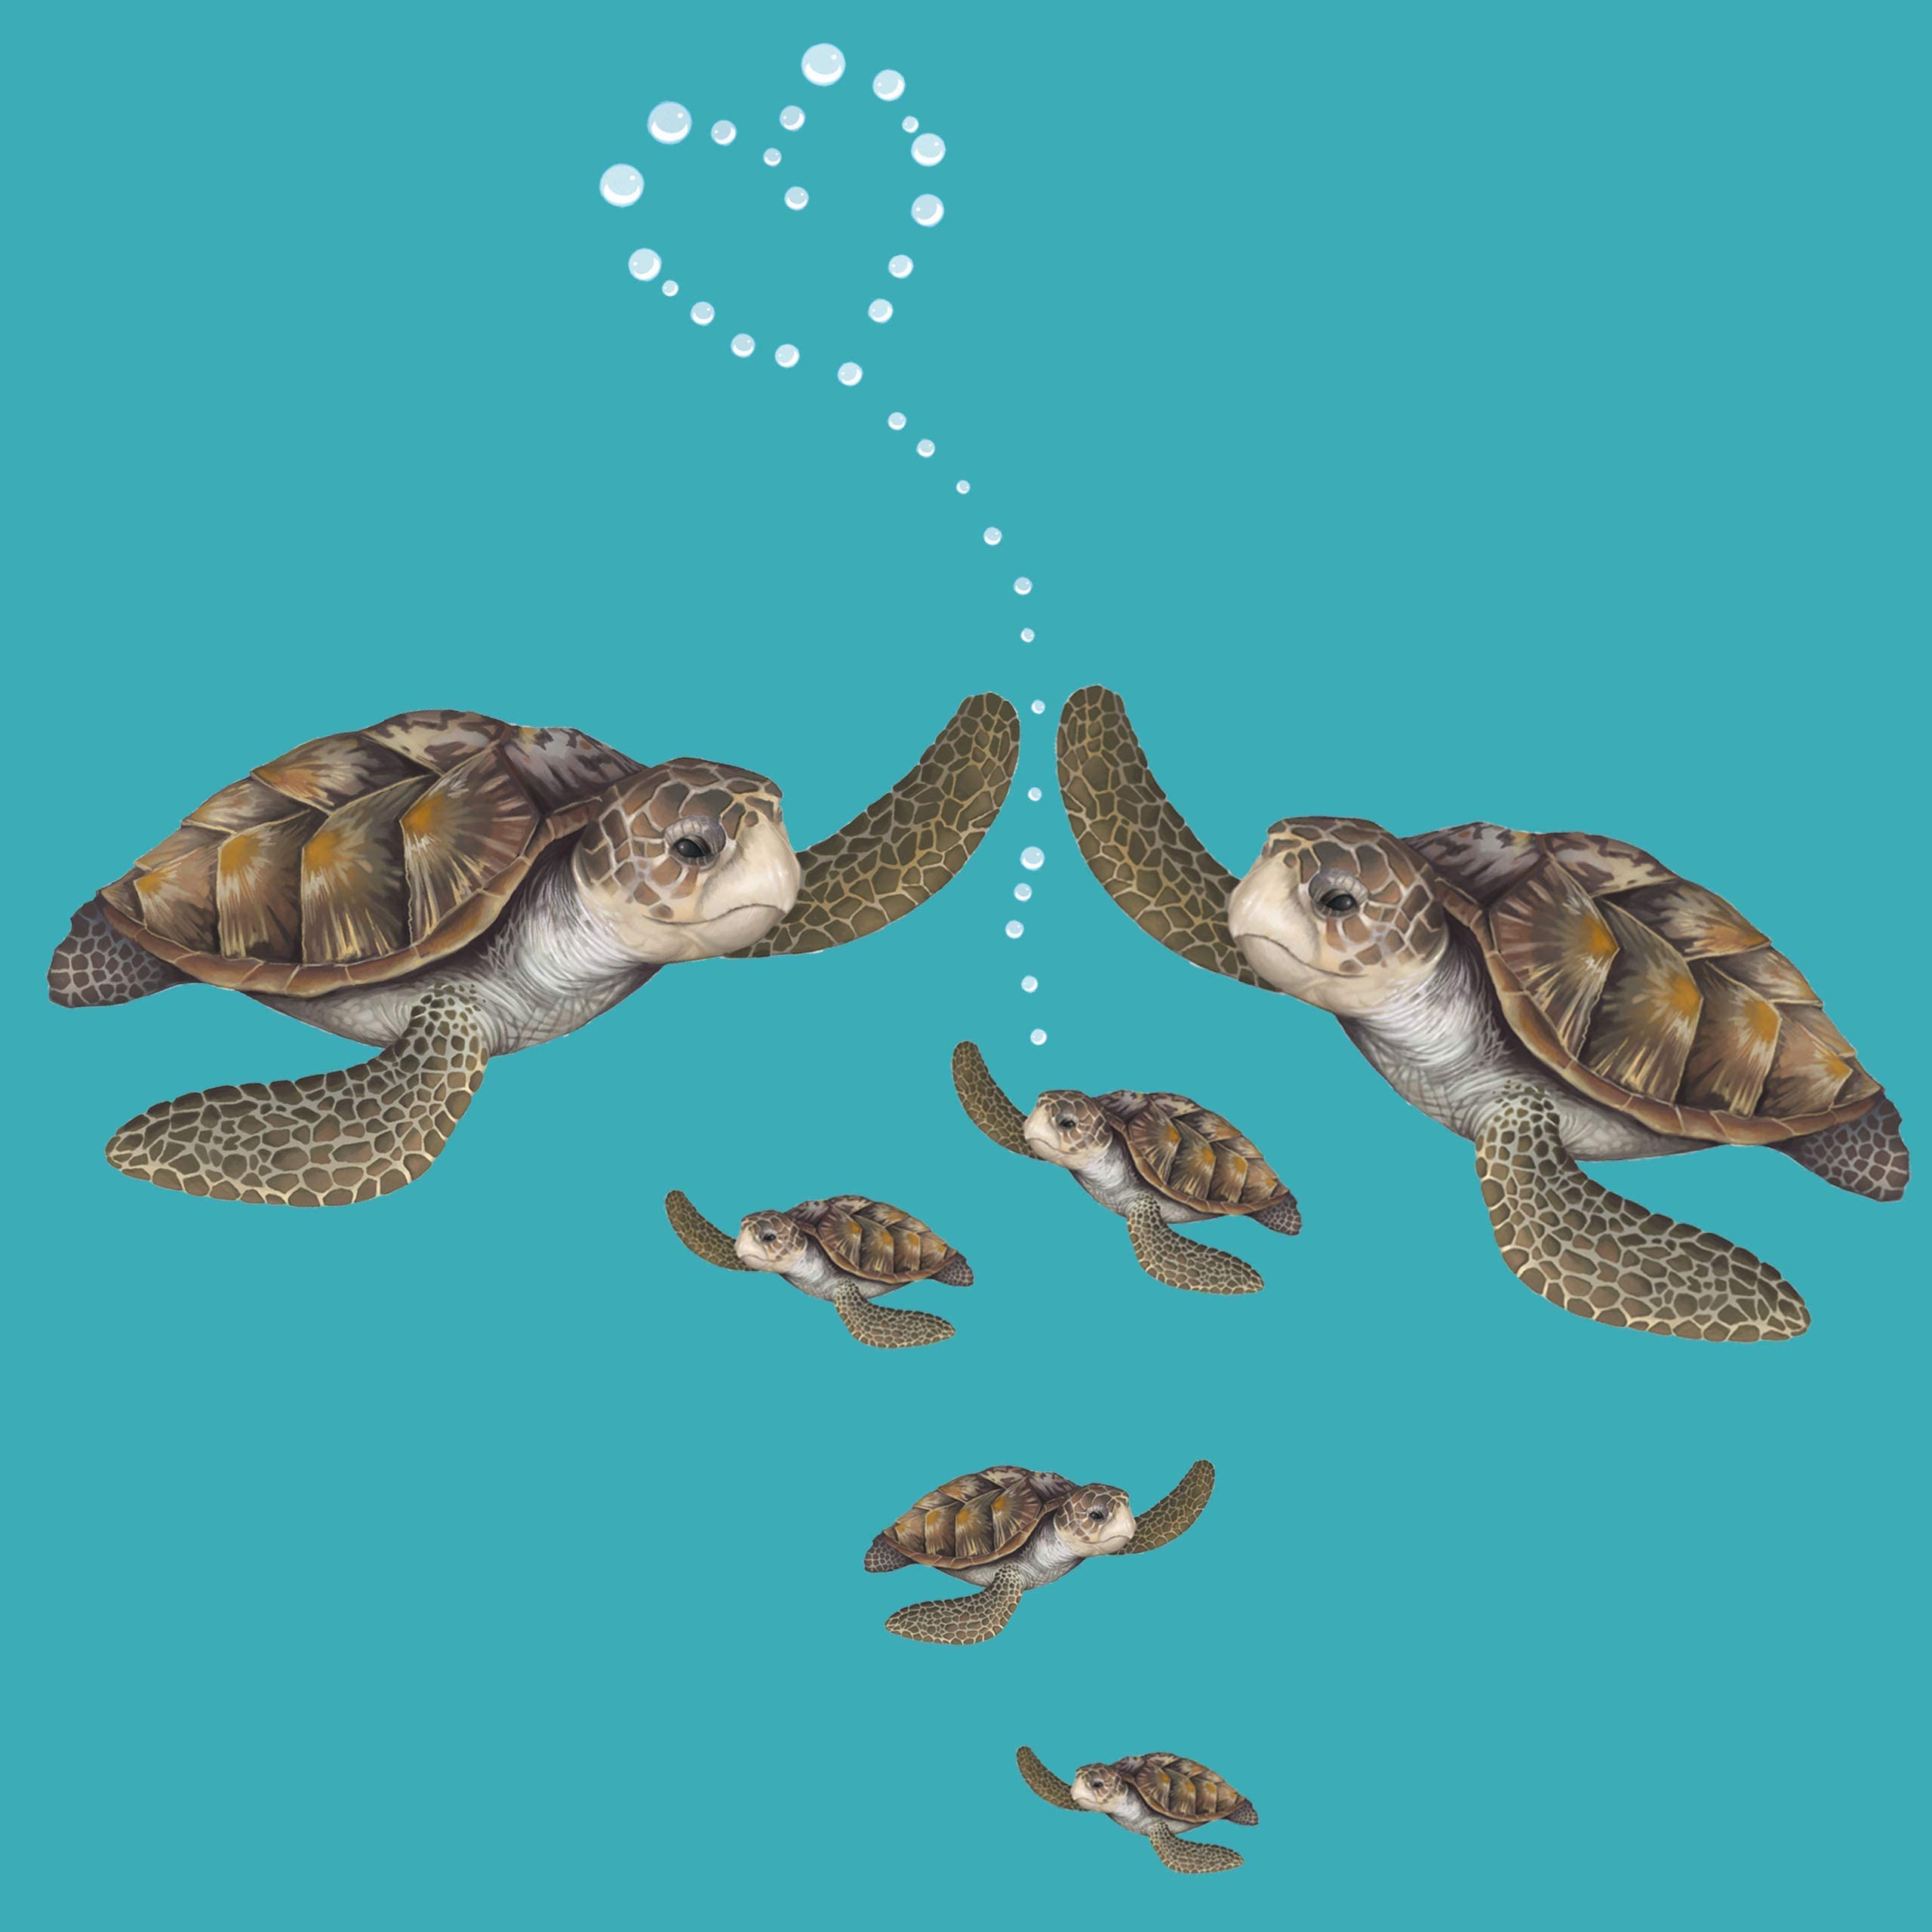 A family of turtles swims in the ocean. - Sea turtle